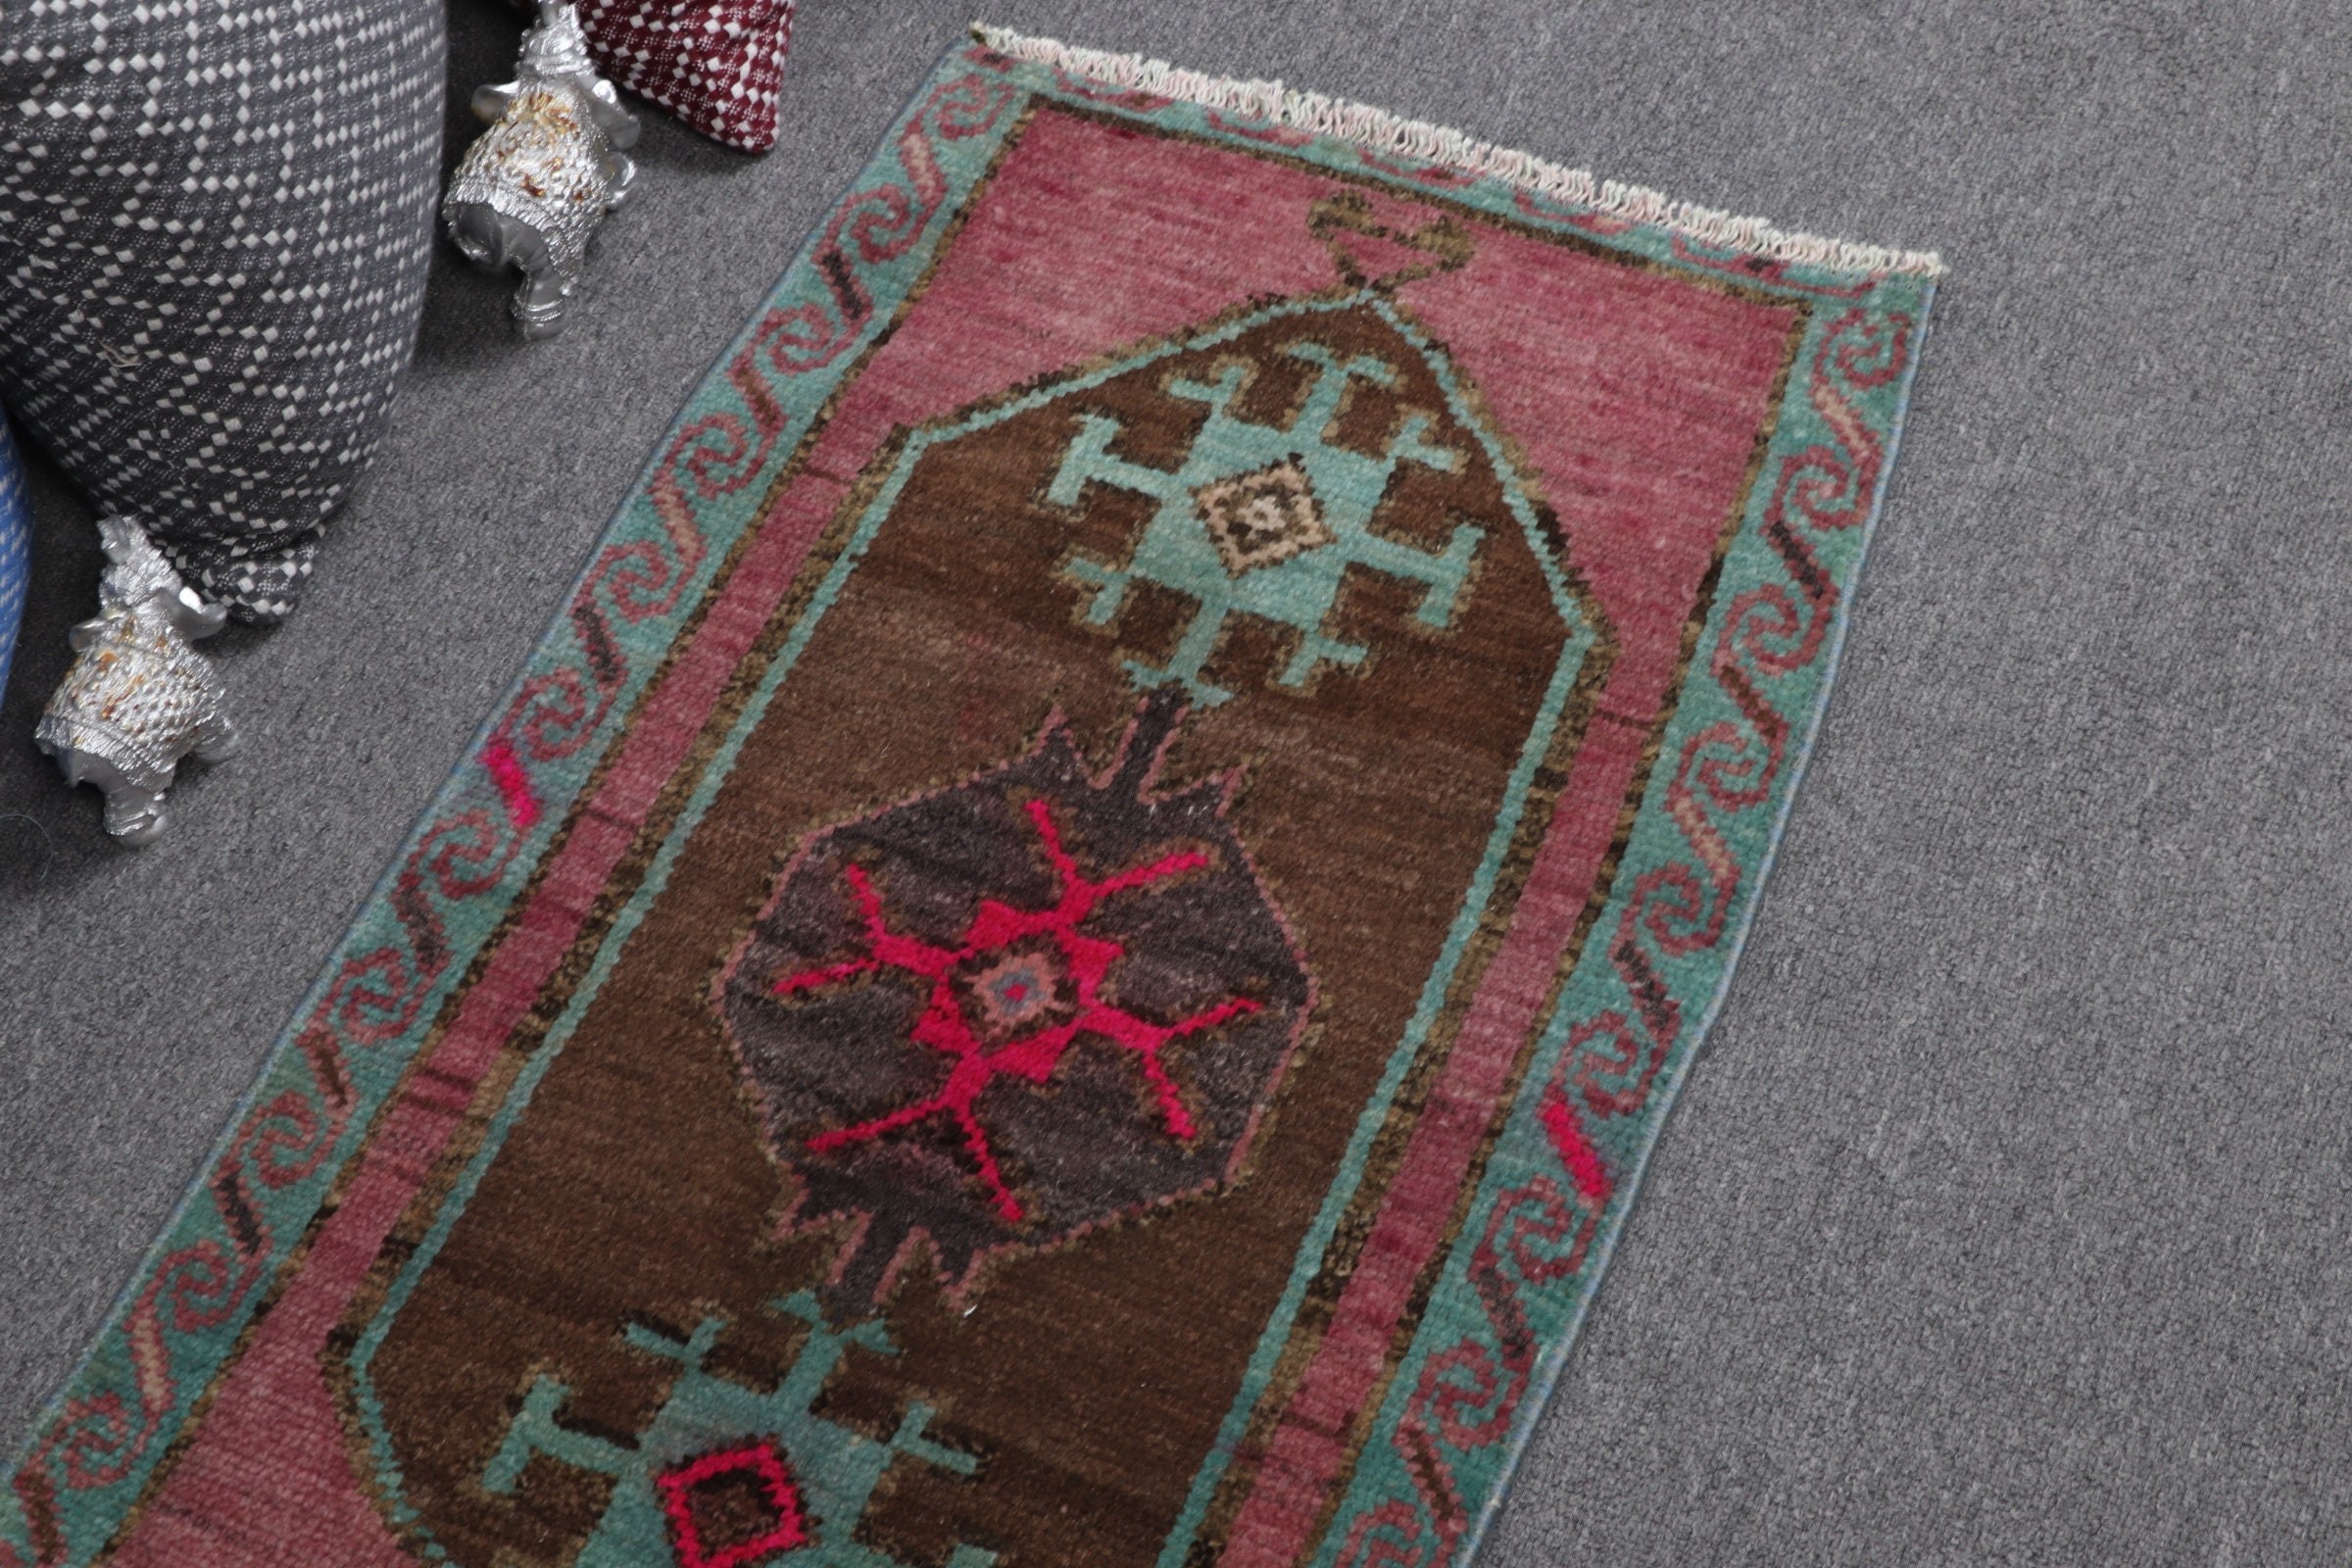 Turkish Rug, 1.5x2.8 ft Small Rug, Bath Rug, Home Decor Rugs, Kitchen Rug, Vintage Rugs, Rugs for Kitchen, Brown Floor Rugs, Bedroom Rugs